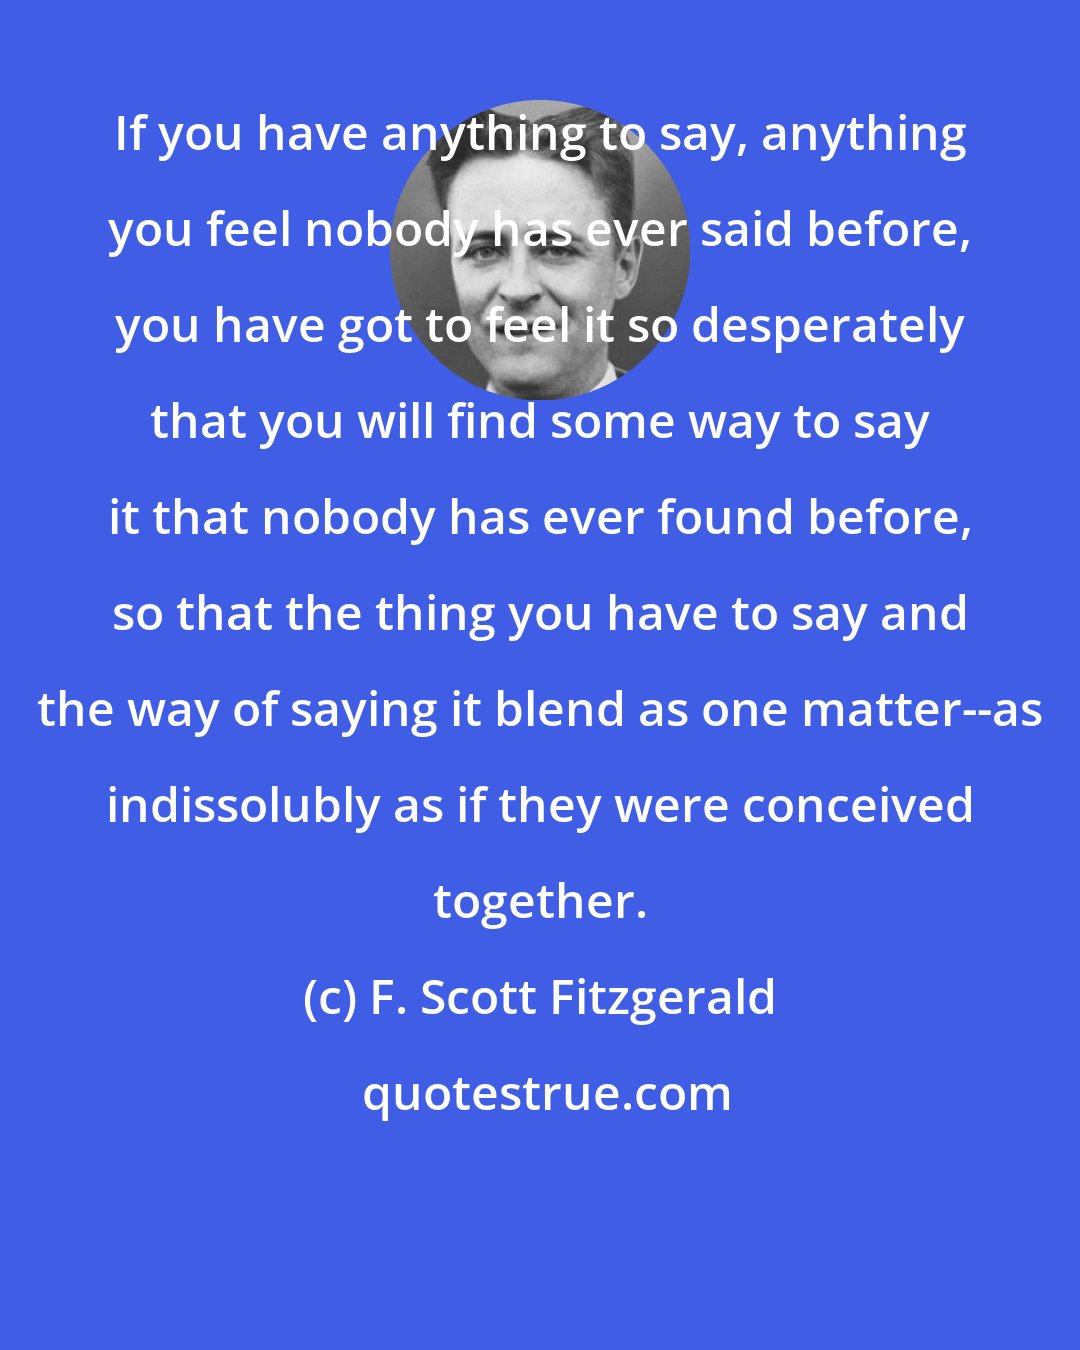 F. Scott Fitzgerald: If you have anything to say, anything you feel nobody has ever said before, you have got to feel it so desperately that you will find some way to say it that nobody has ever found before, so that the thing you have to say and the way of saying it blend as one matter--as indissolubly as if they were conceived together.